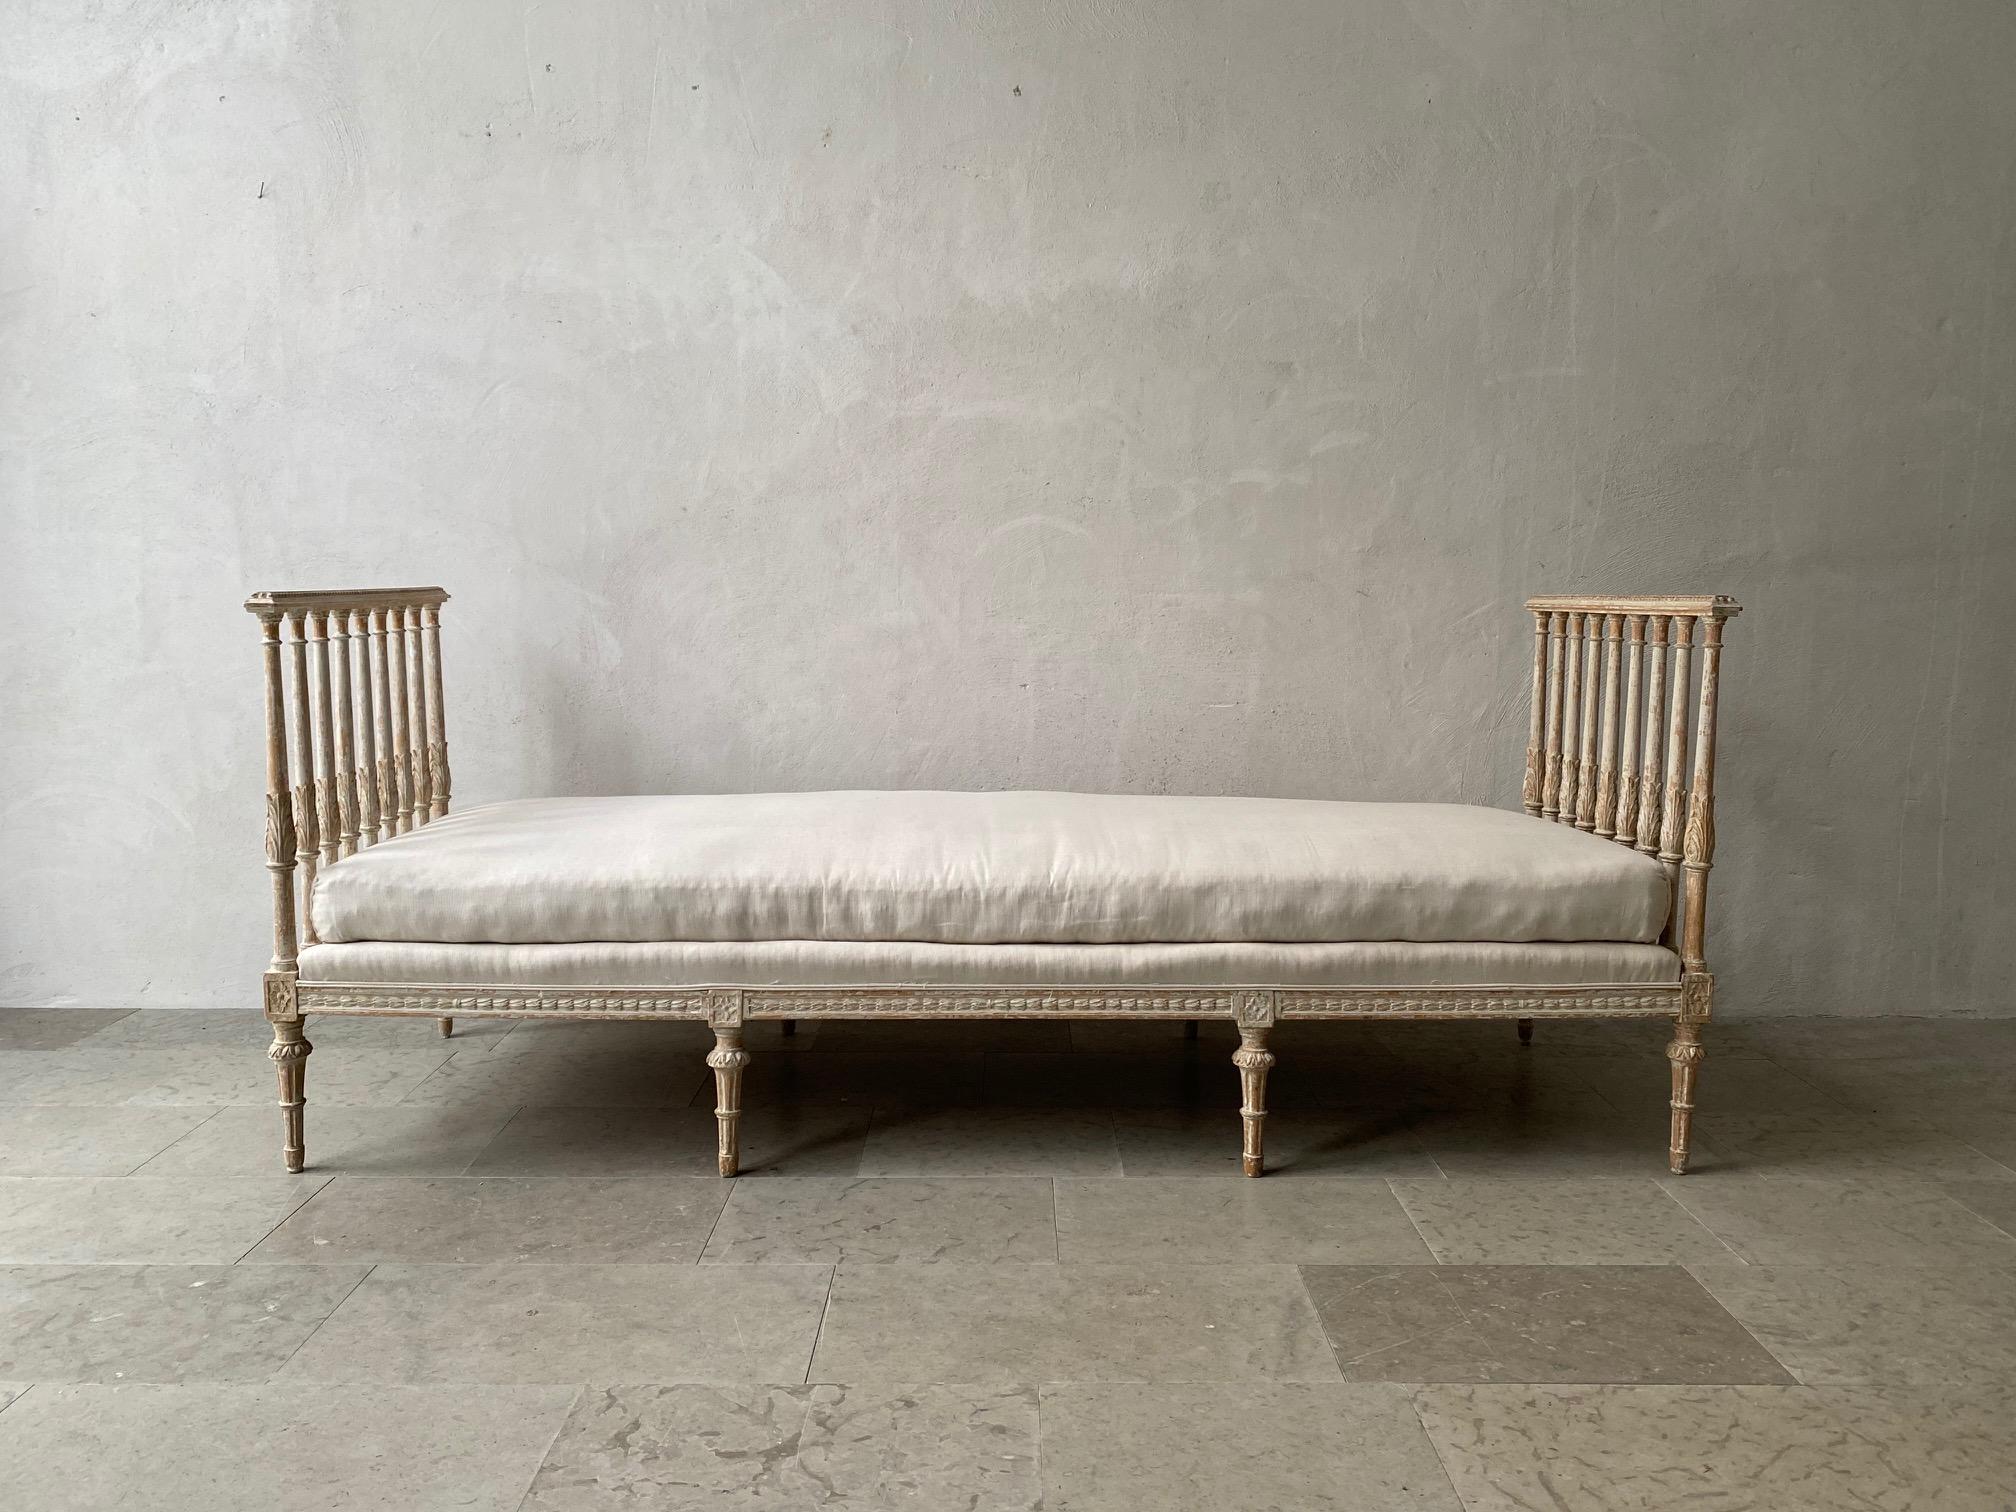 A carved Swedish Gustavian period daybed, signed ILG for Johan Lindgren, Stockholm. Johan was a master chair maker in Stockholm from 1740-1800. This beautiful, circa 1780 daybed has been hand-scraped to reveal the original paint surface and newly